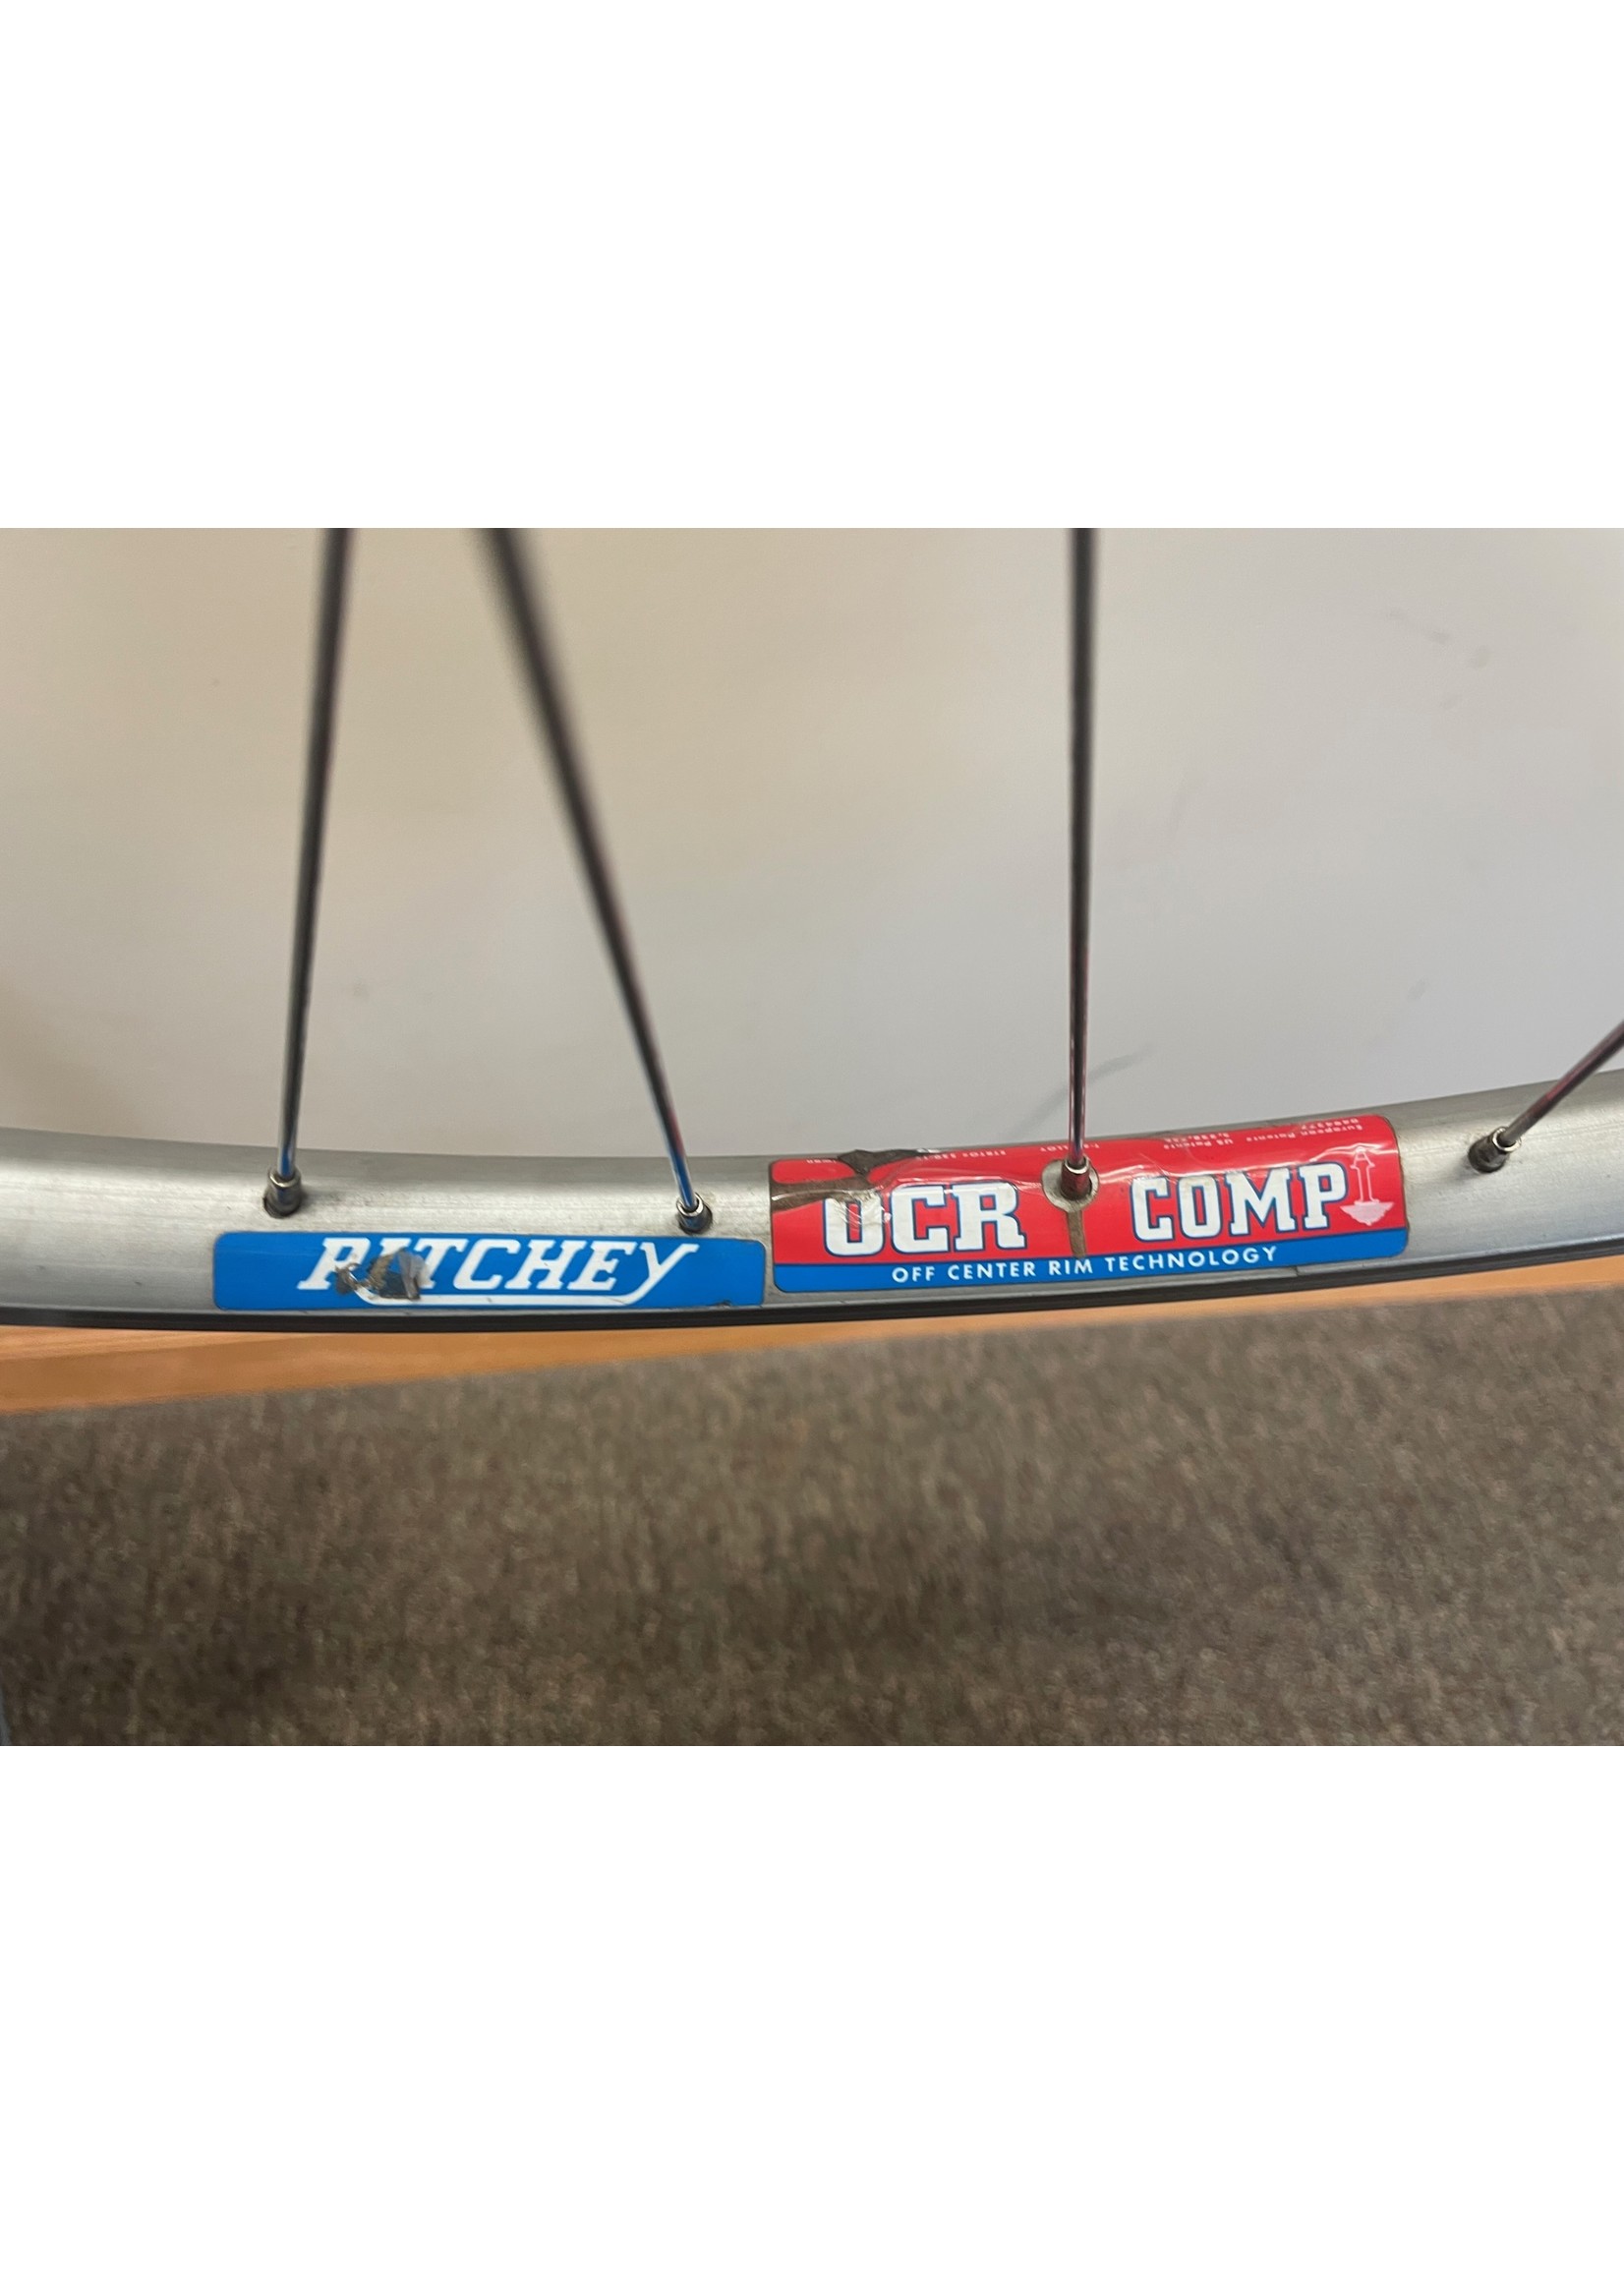 Ritchey Ritchey Rock Comp Deore LX M570 26 Inch Wheelset